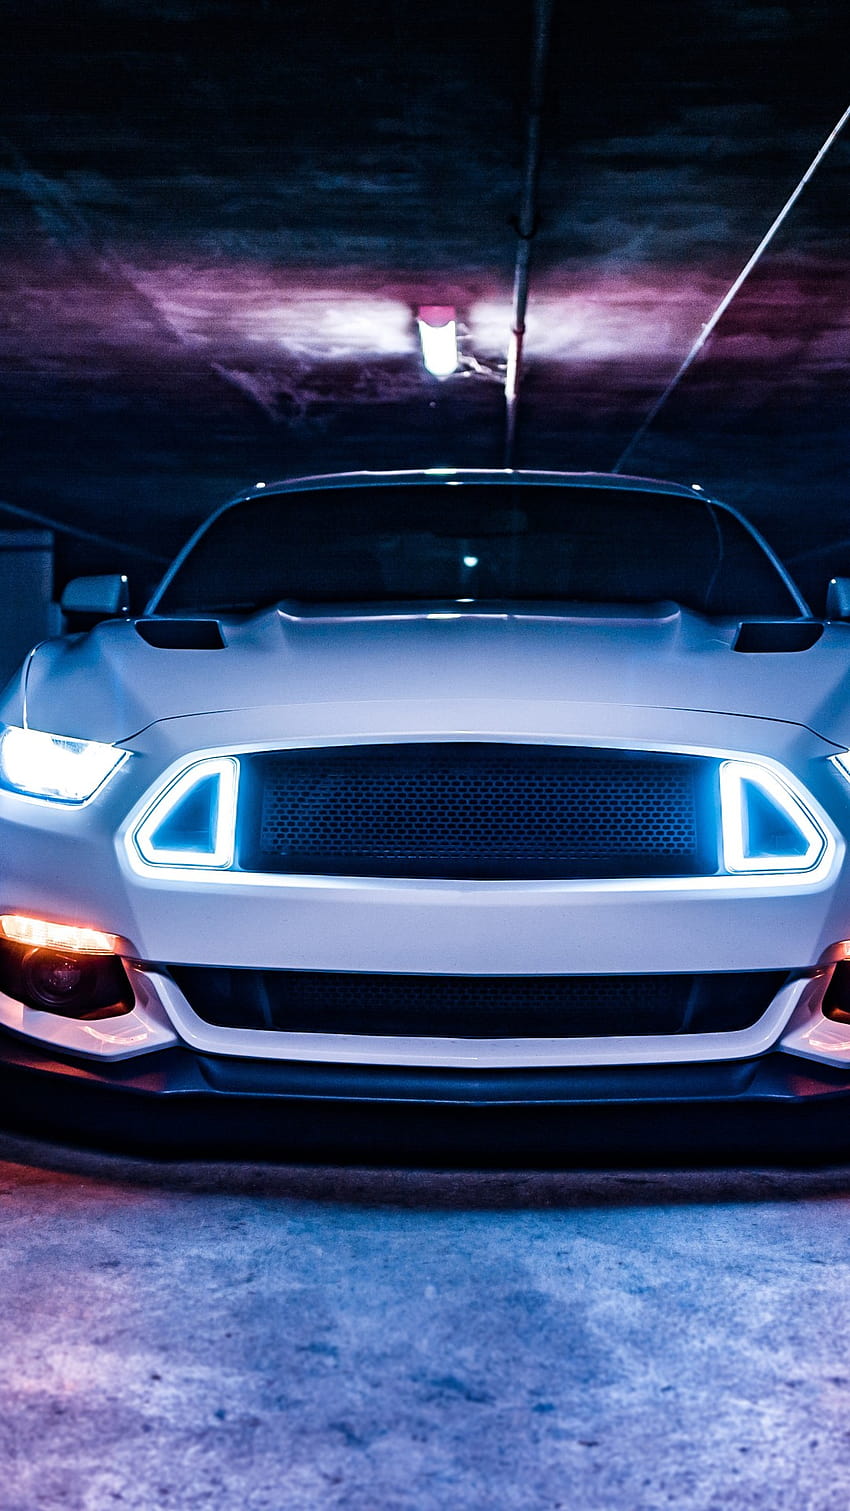 Ford Mustang Neon lights iPhone 6 Plus, mustang mobile HD phone wallpaper